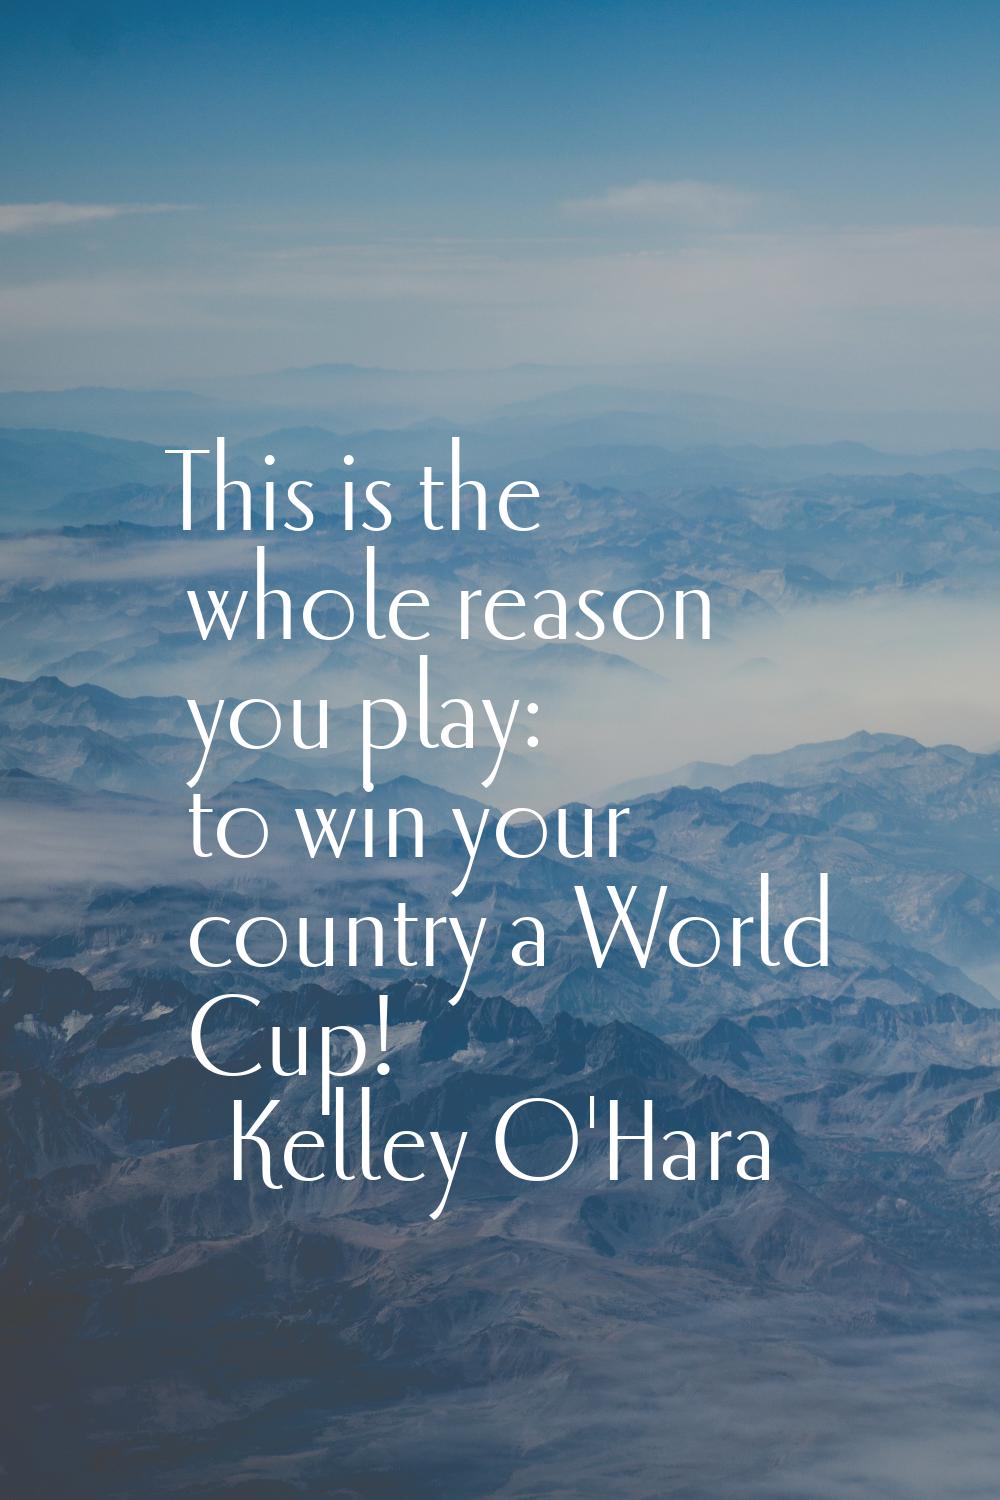 This is the whole reason you play: to win your country a World Cup!